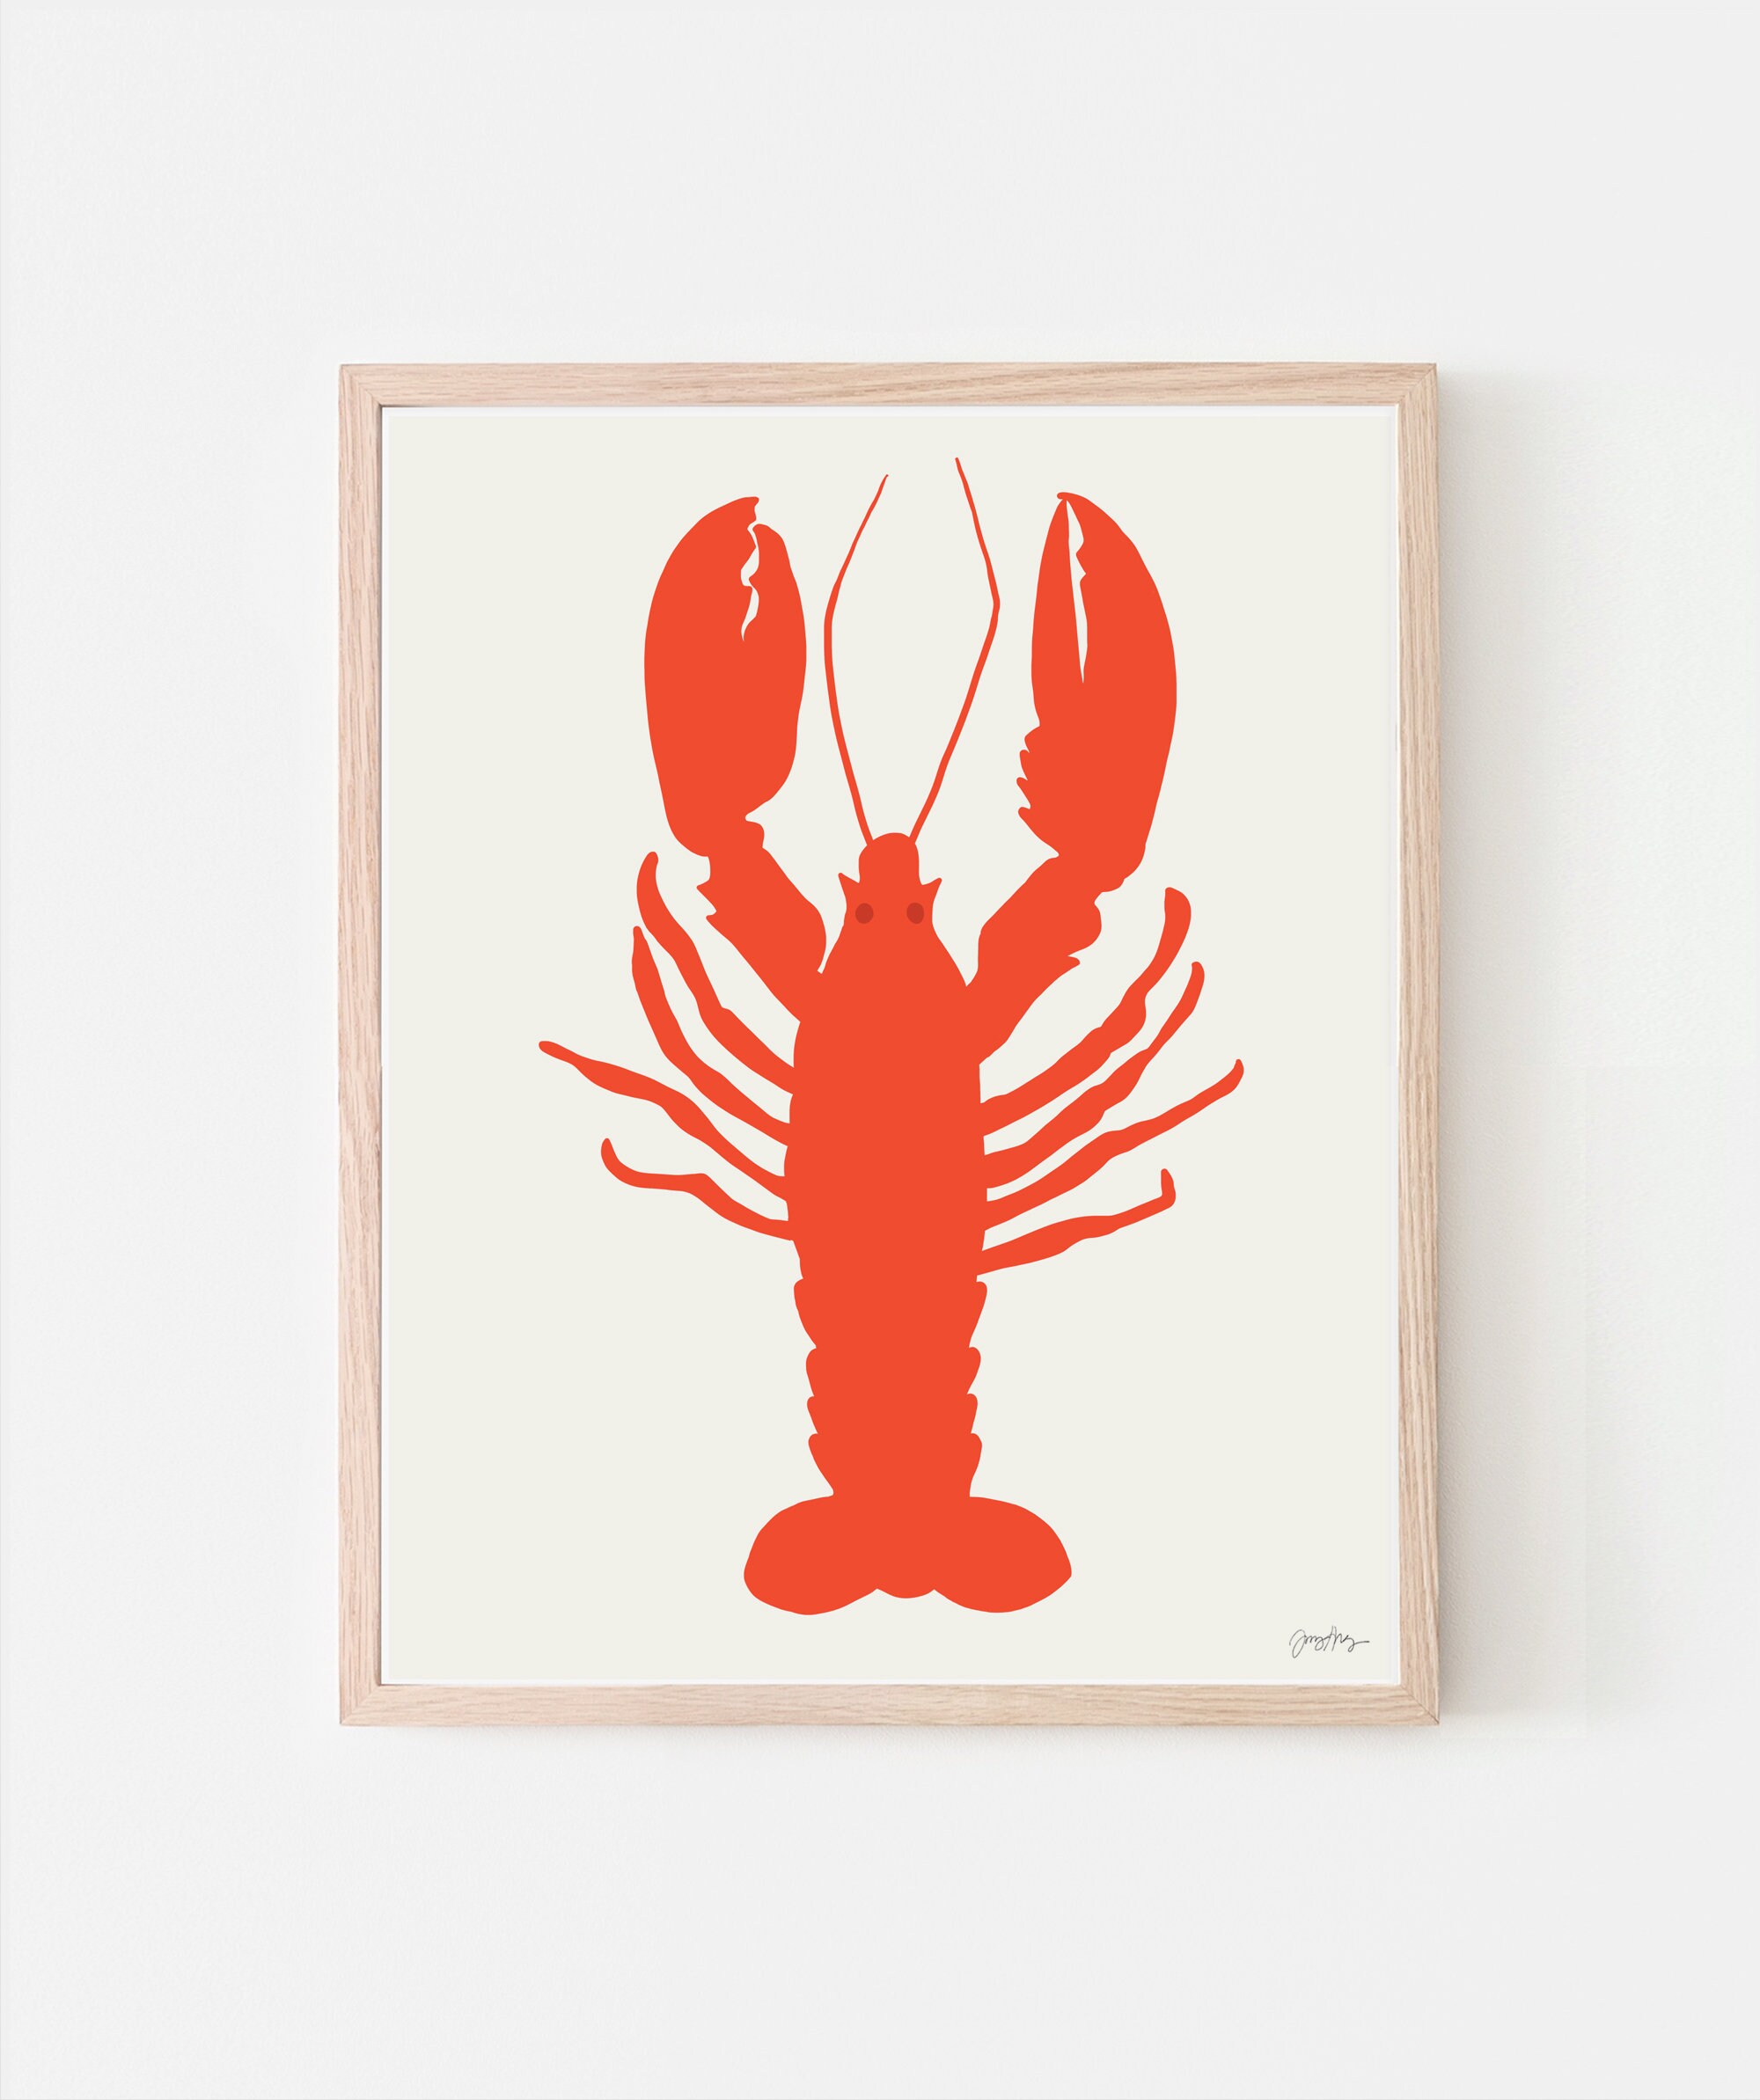 Lobster Art Print - Signed and Printed by the Artist - Framed or ...